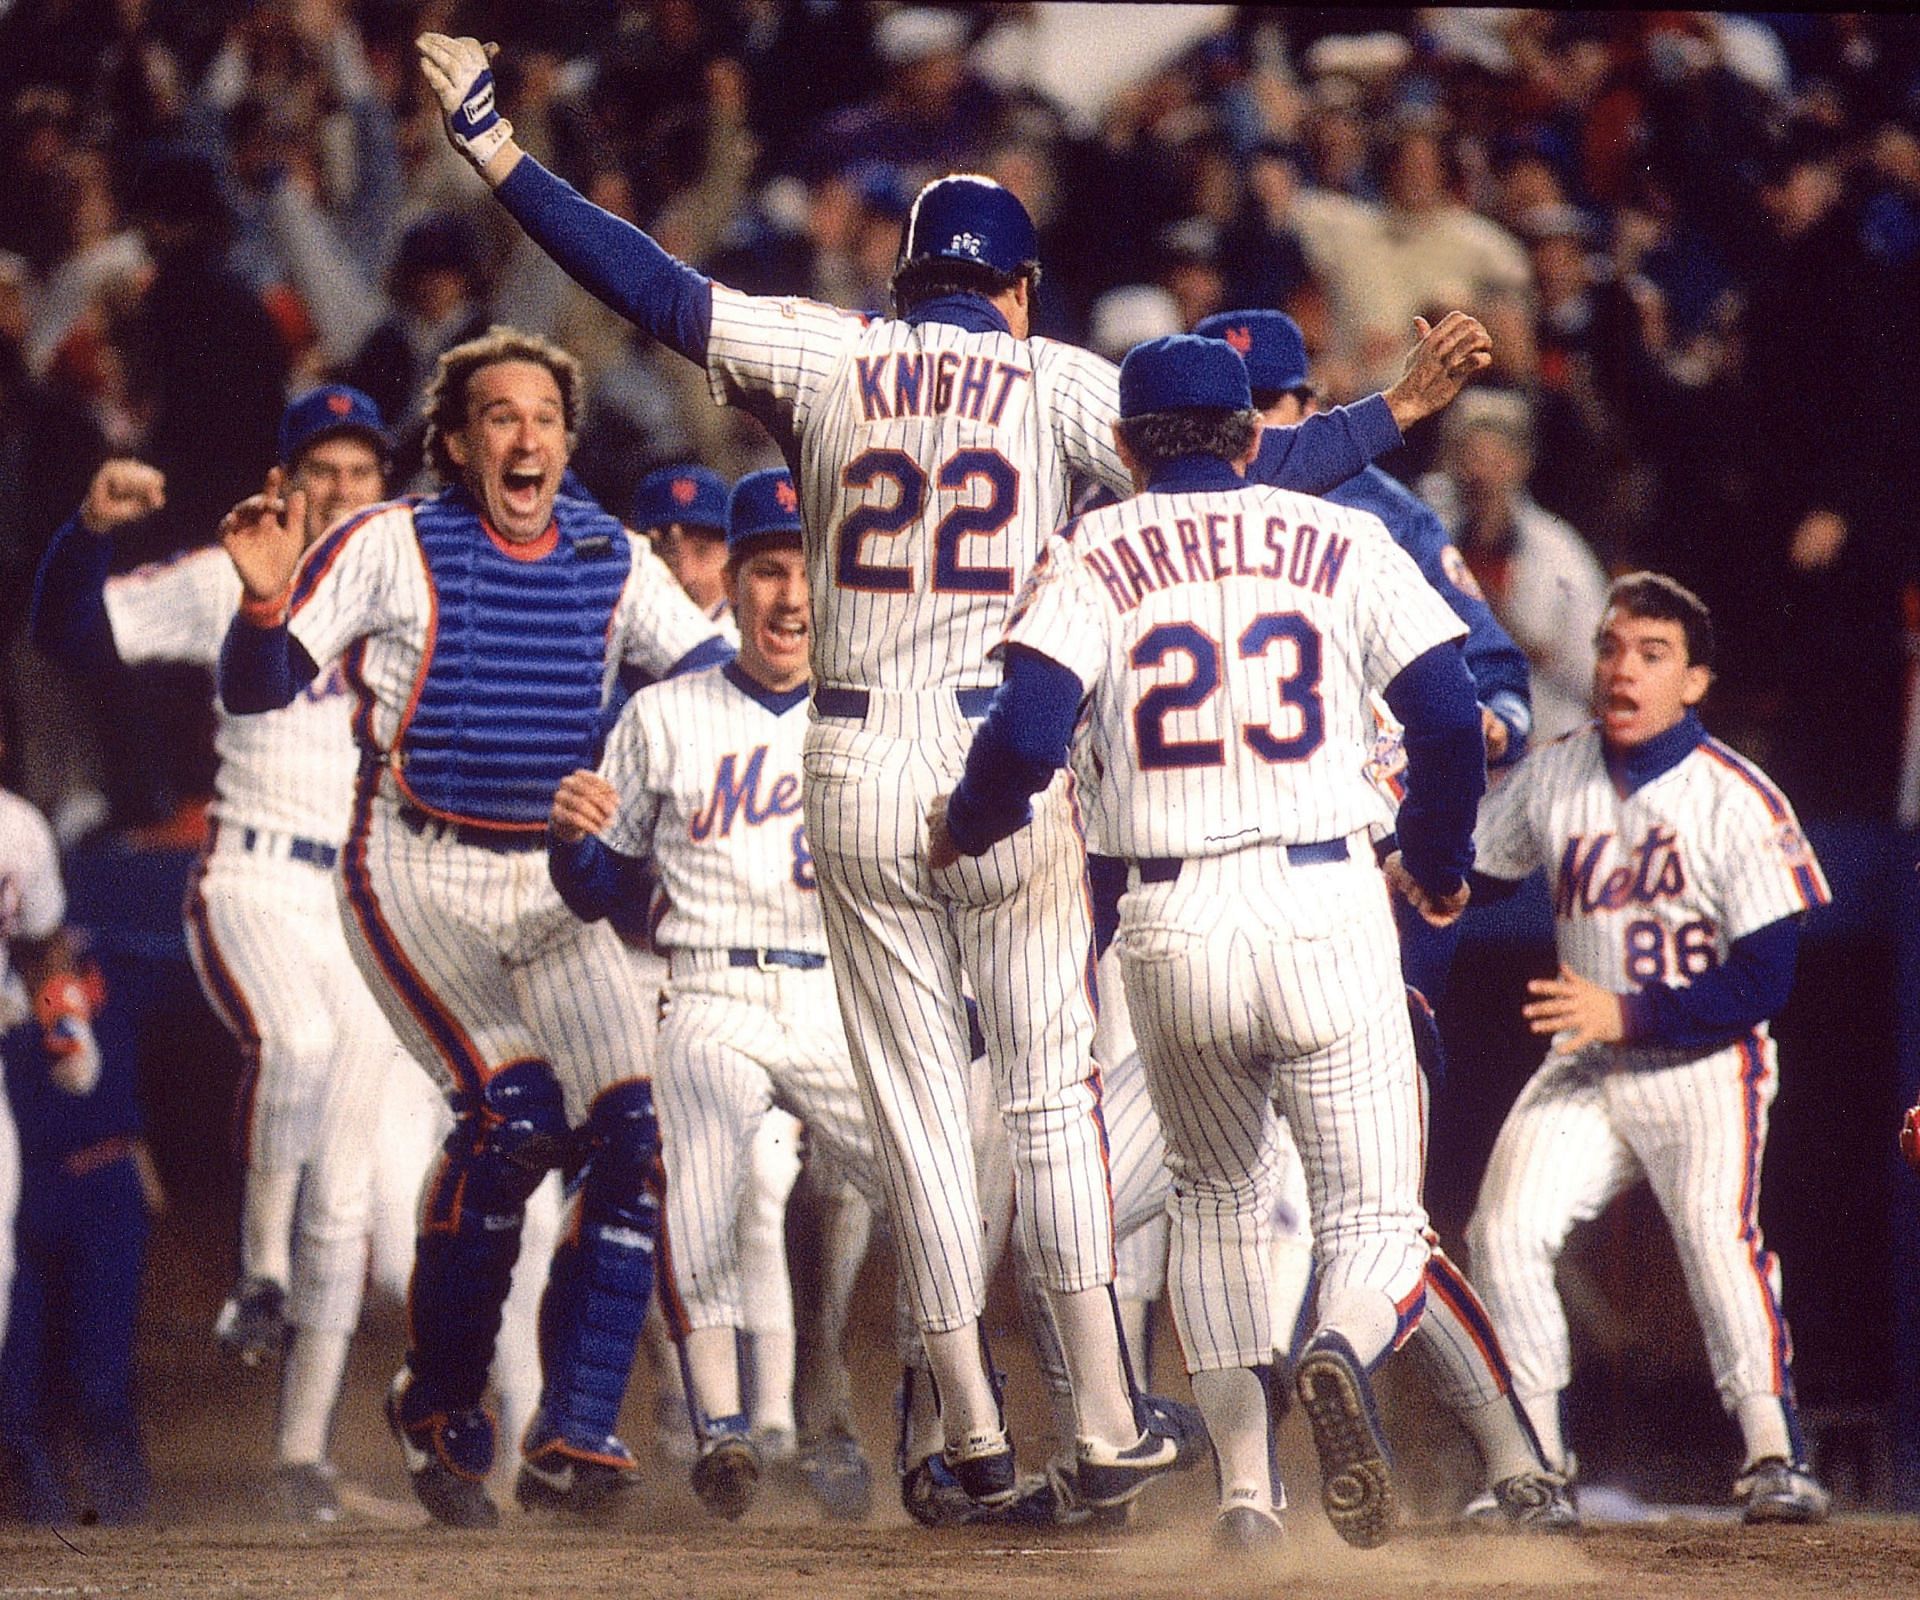 Mets players celebrate after winning Game 6 of the 1986 World Series.